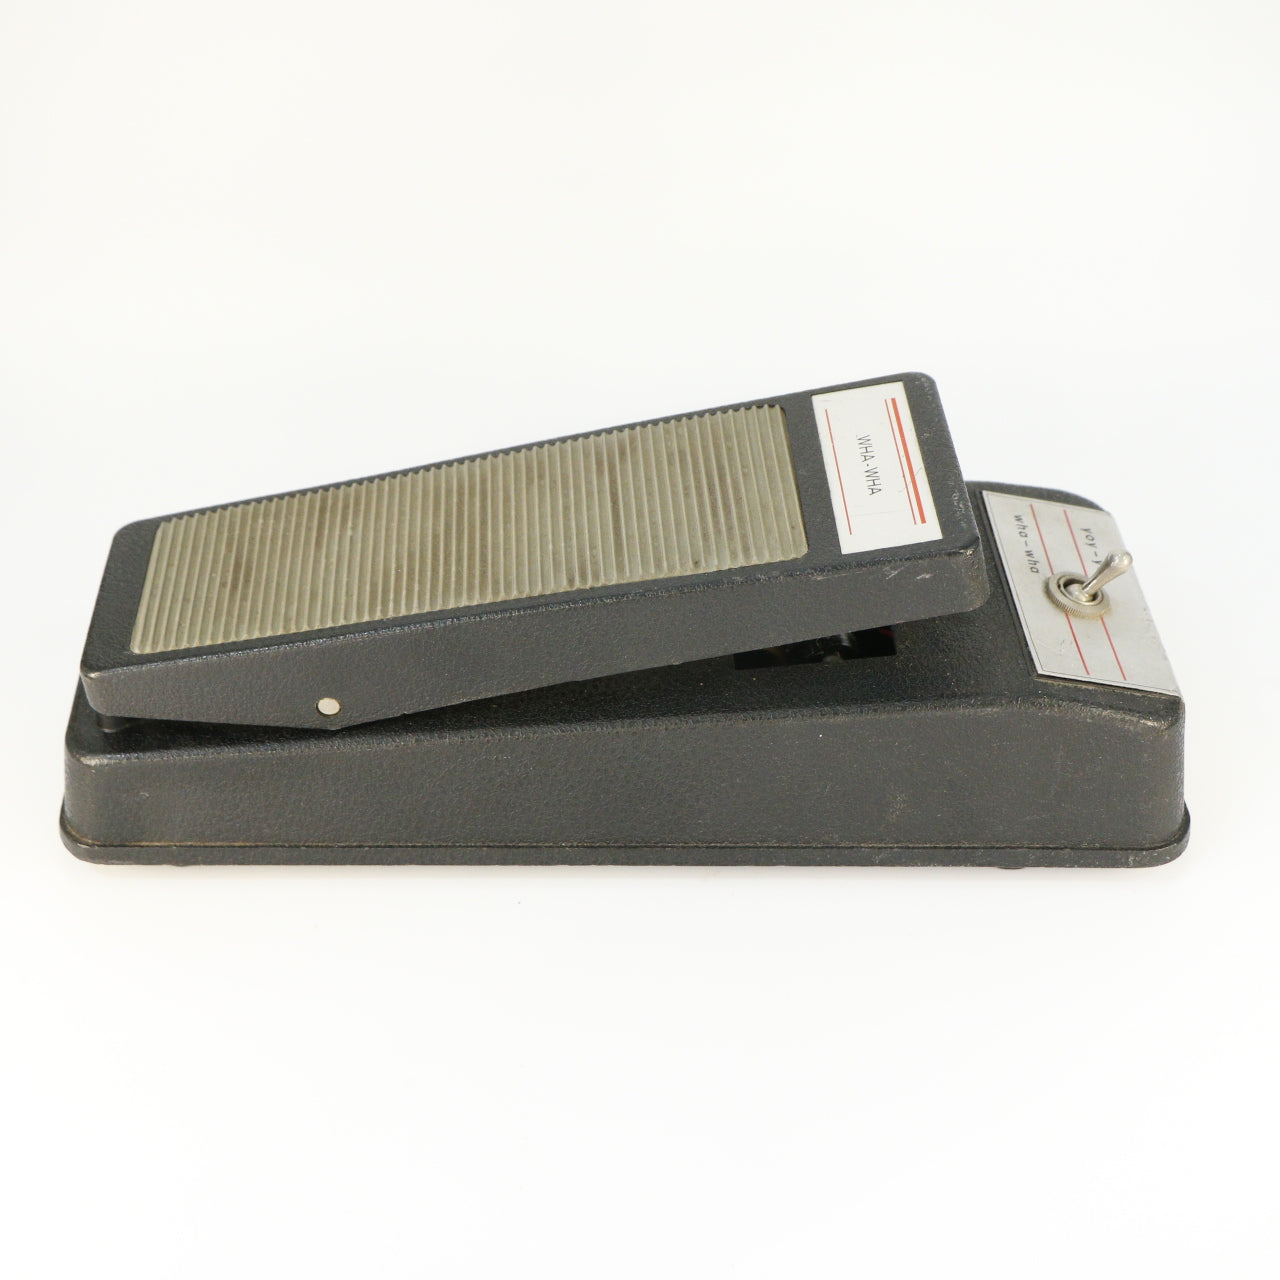 Schaller Yoy-Yoy Wha-Wha Wah Pedal (Vintage, Made in Germany)